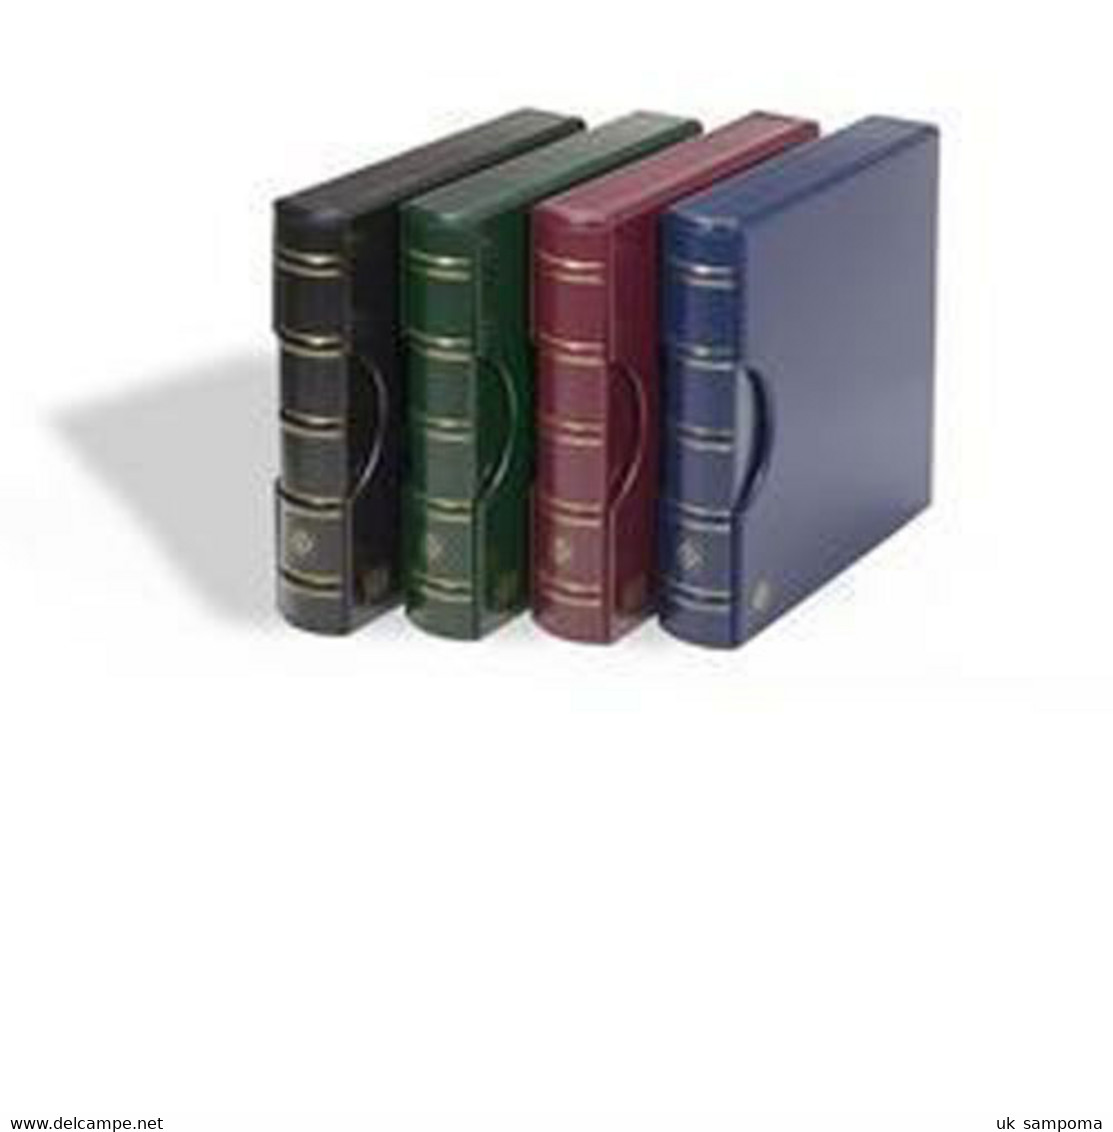 LIGHTHOUSE Ring Binder EXCELLENT DE, In Classic Design With Slipcase, Green - Grand Format, Fond Noir